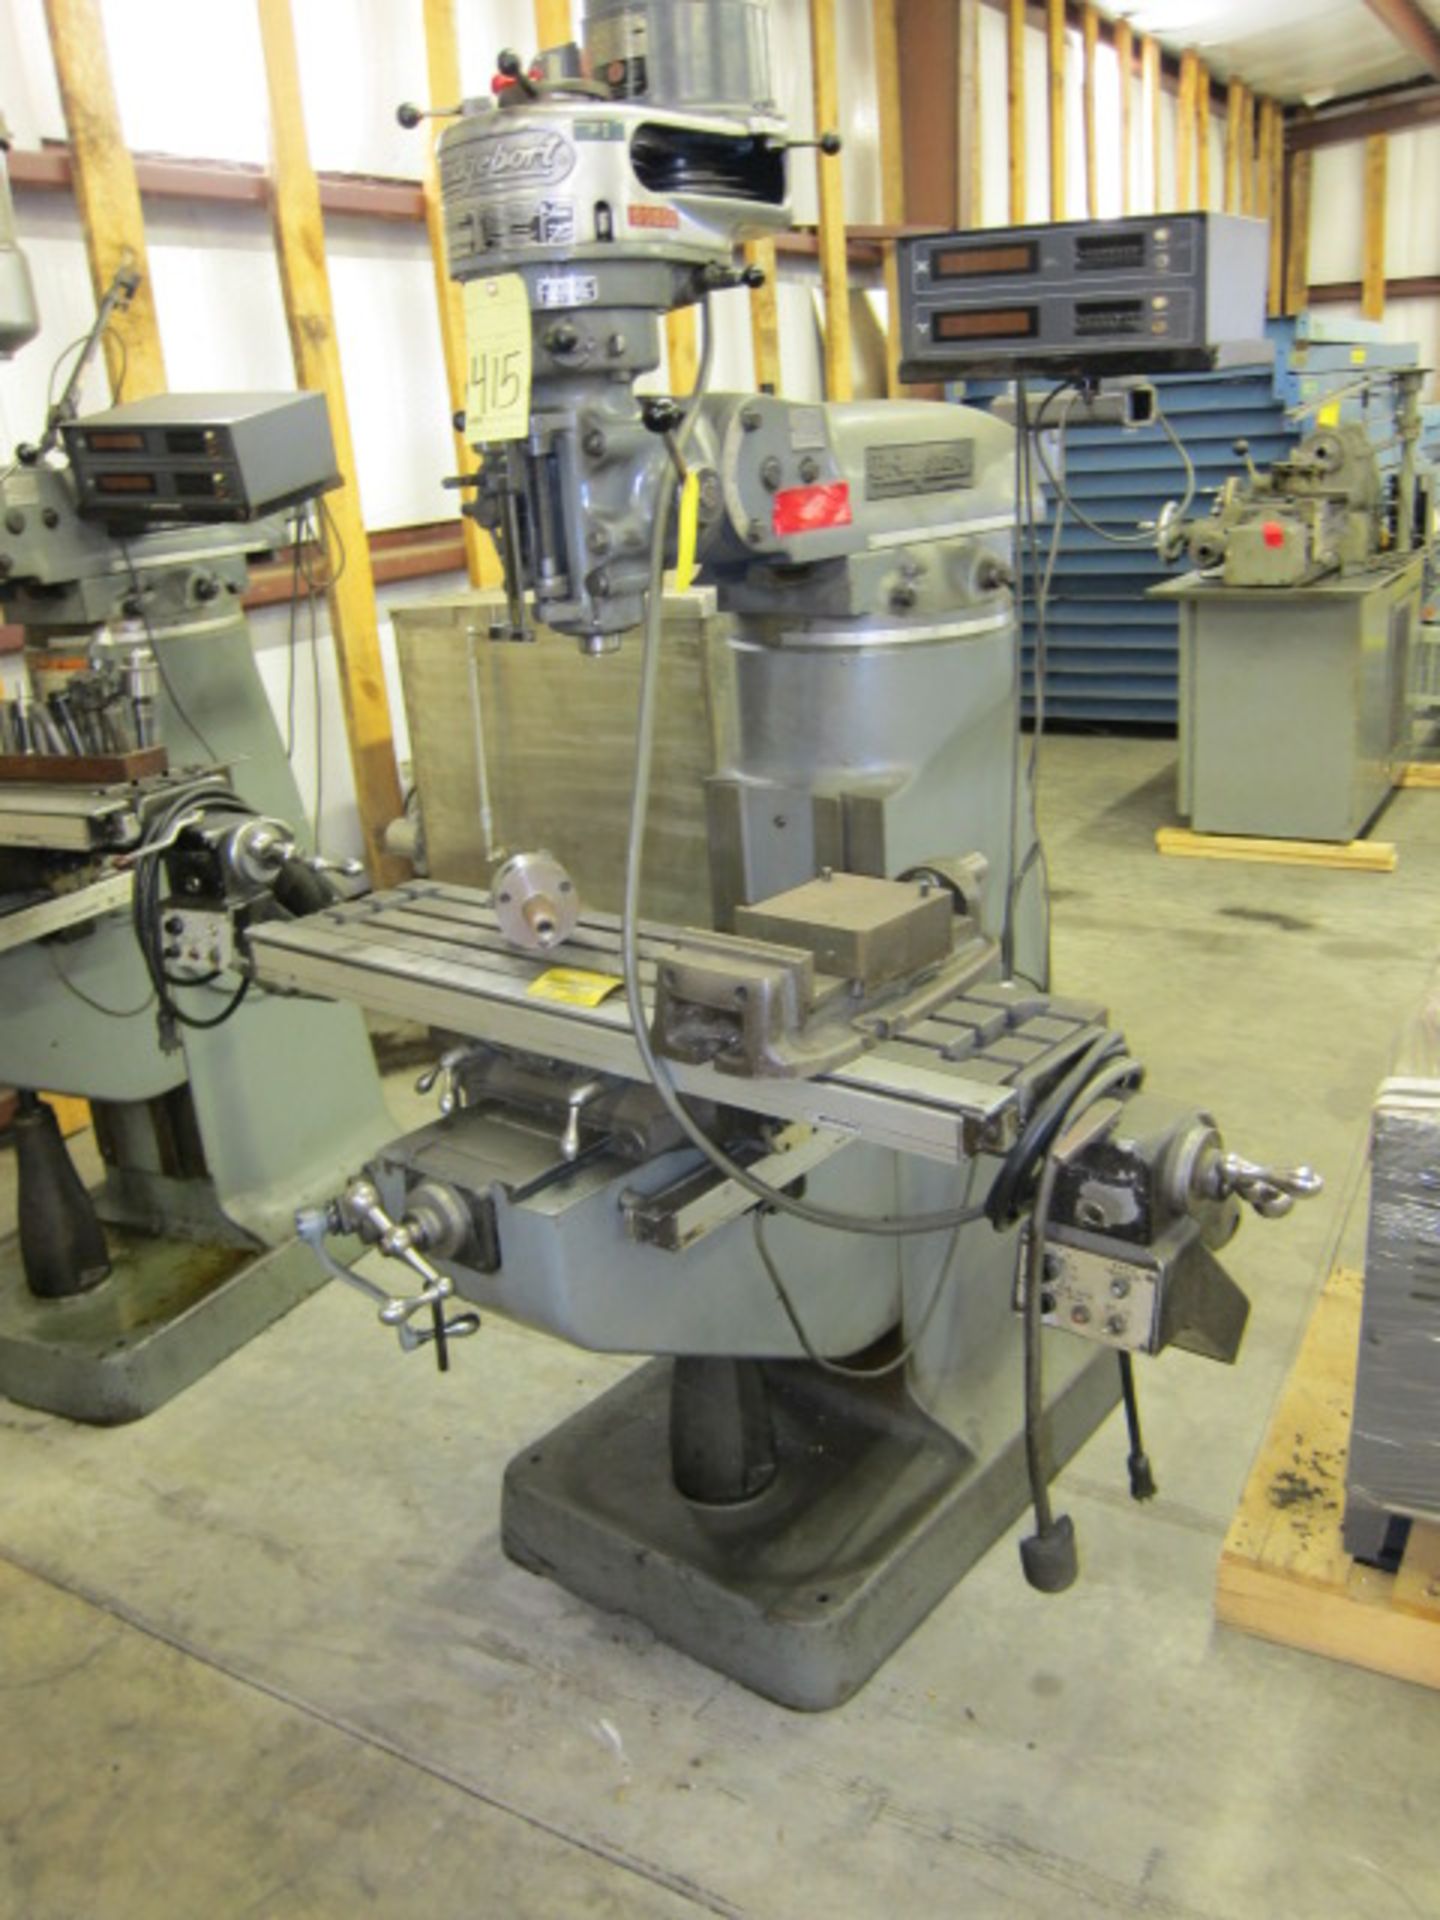 VERTICAL MILL BRIDGEPORT, 1 HP, 42" x 9" table, rapid traverse Mitutoyo readout, S/N 243550 (Sold by